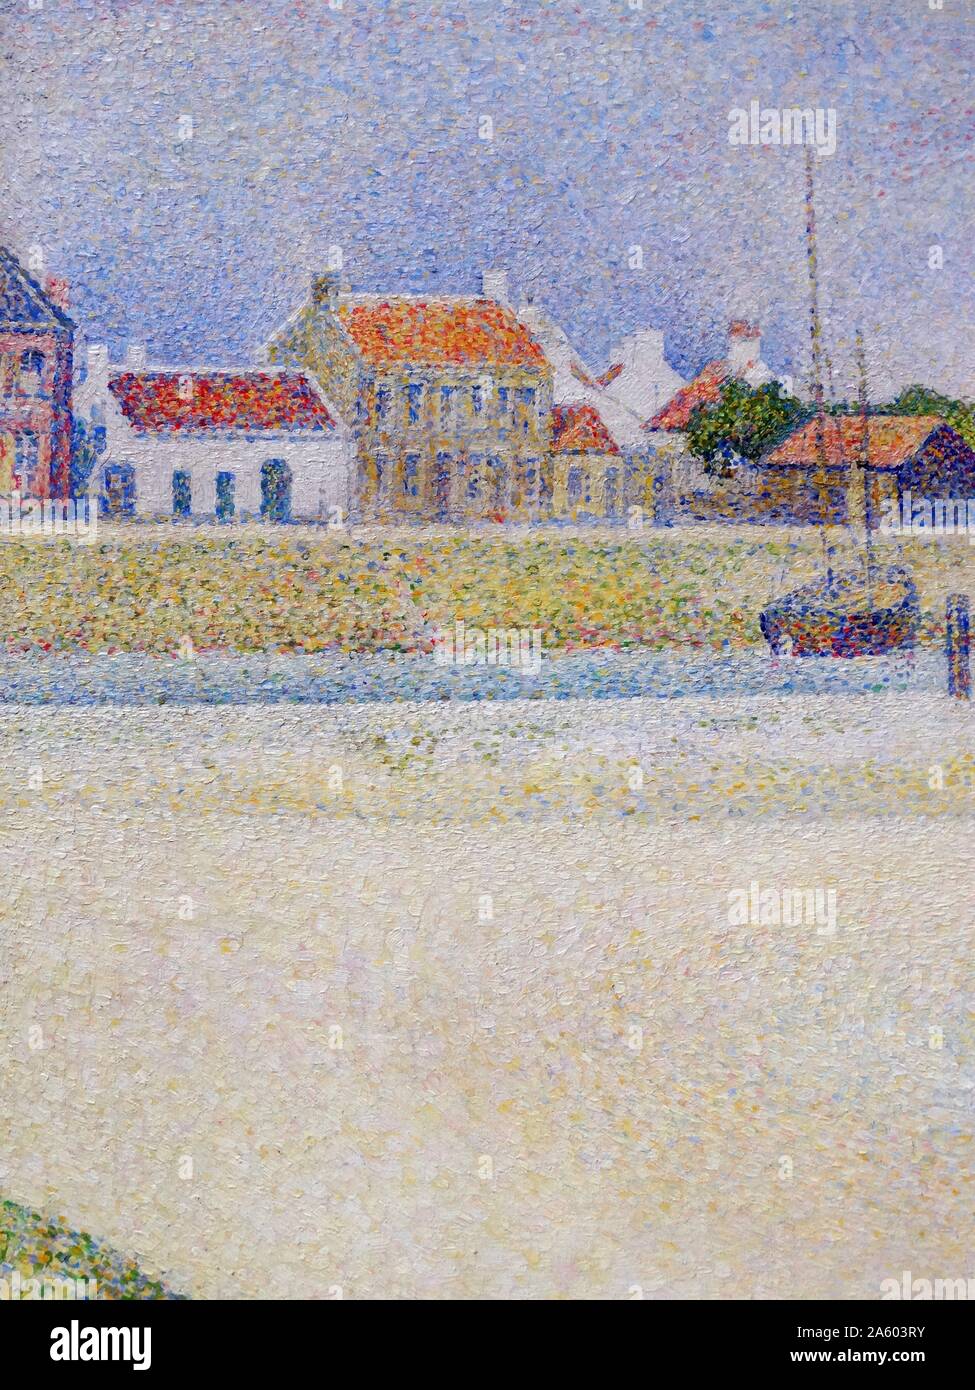 Painting titled 'The Channel of Gravelines, Grand Fort-Philippe' by Georges-Pierre Seurat (1859-1891) a French post-Impressionist painter and draftsman. Dated 19th Century Stock Photo